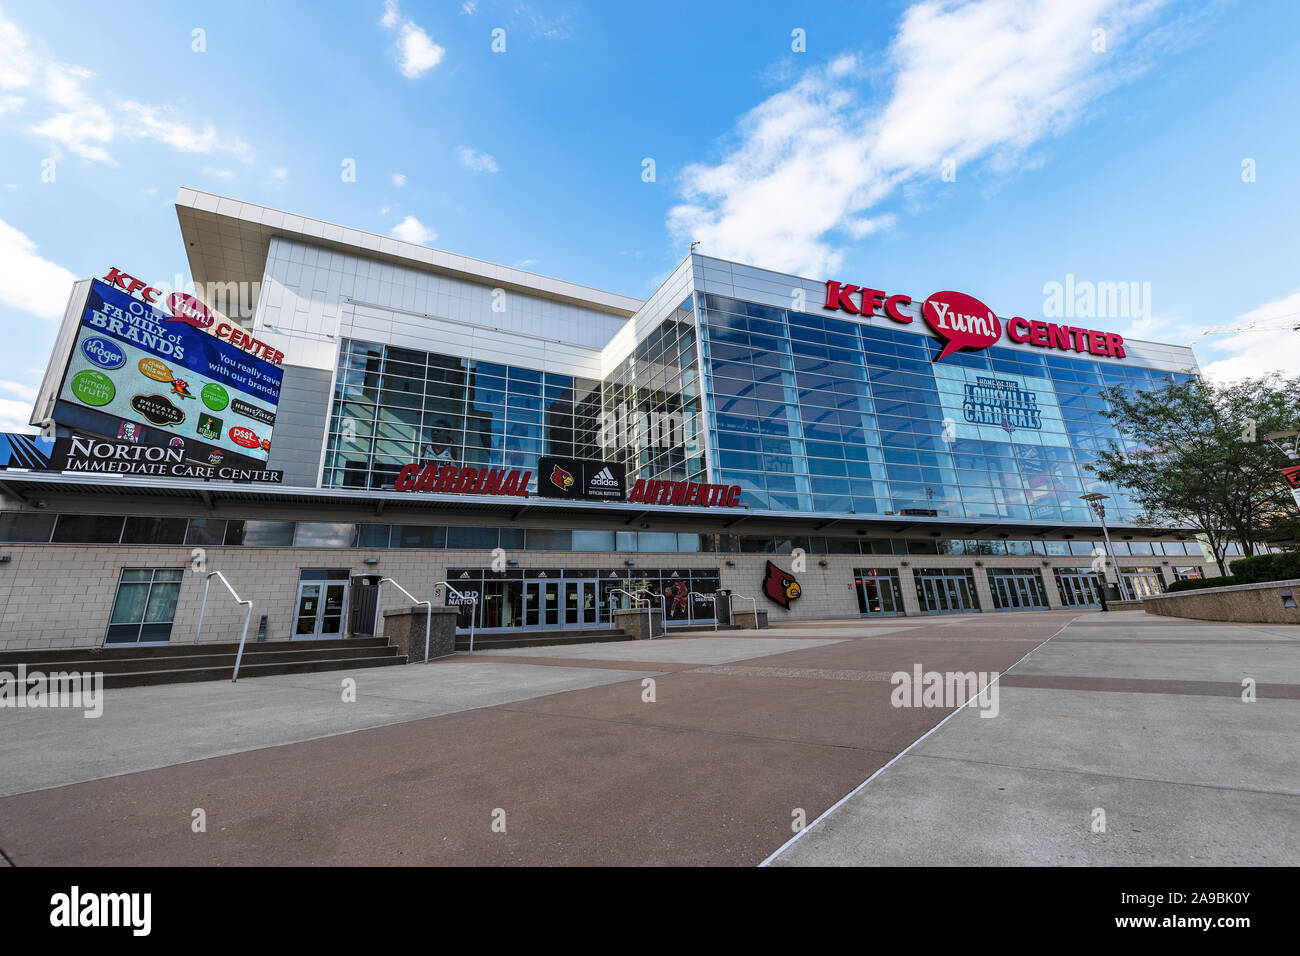 The KFC Yum! Center is home to the University of Louisville's Men & Women's Basketball teams, as well as concerts and other events. Stock Photo